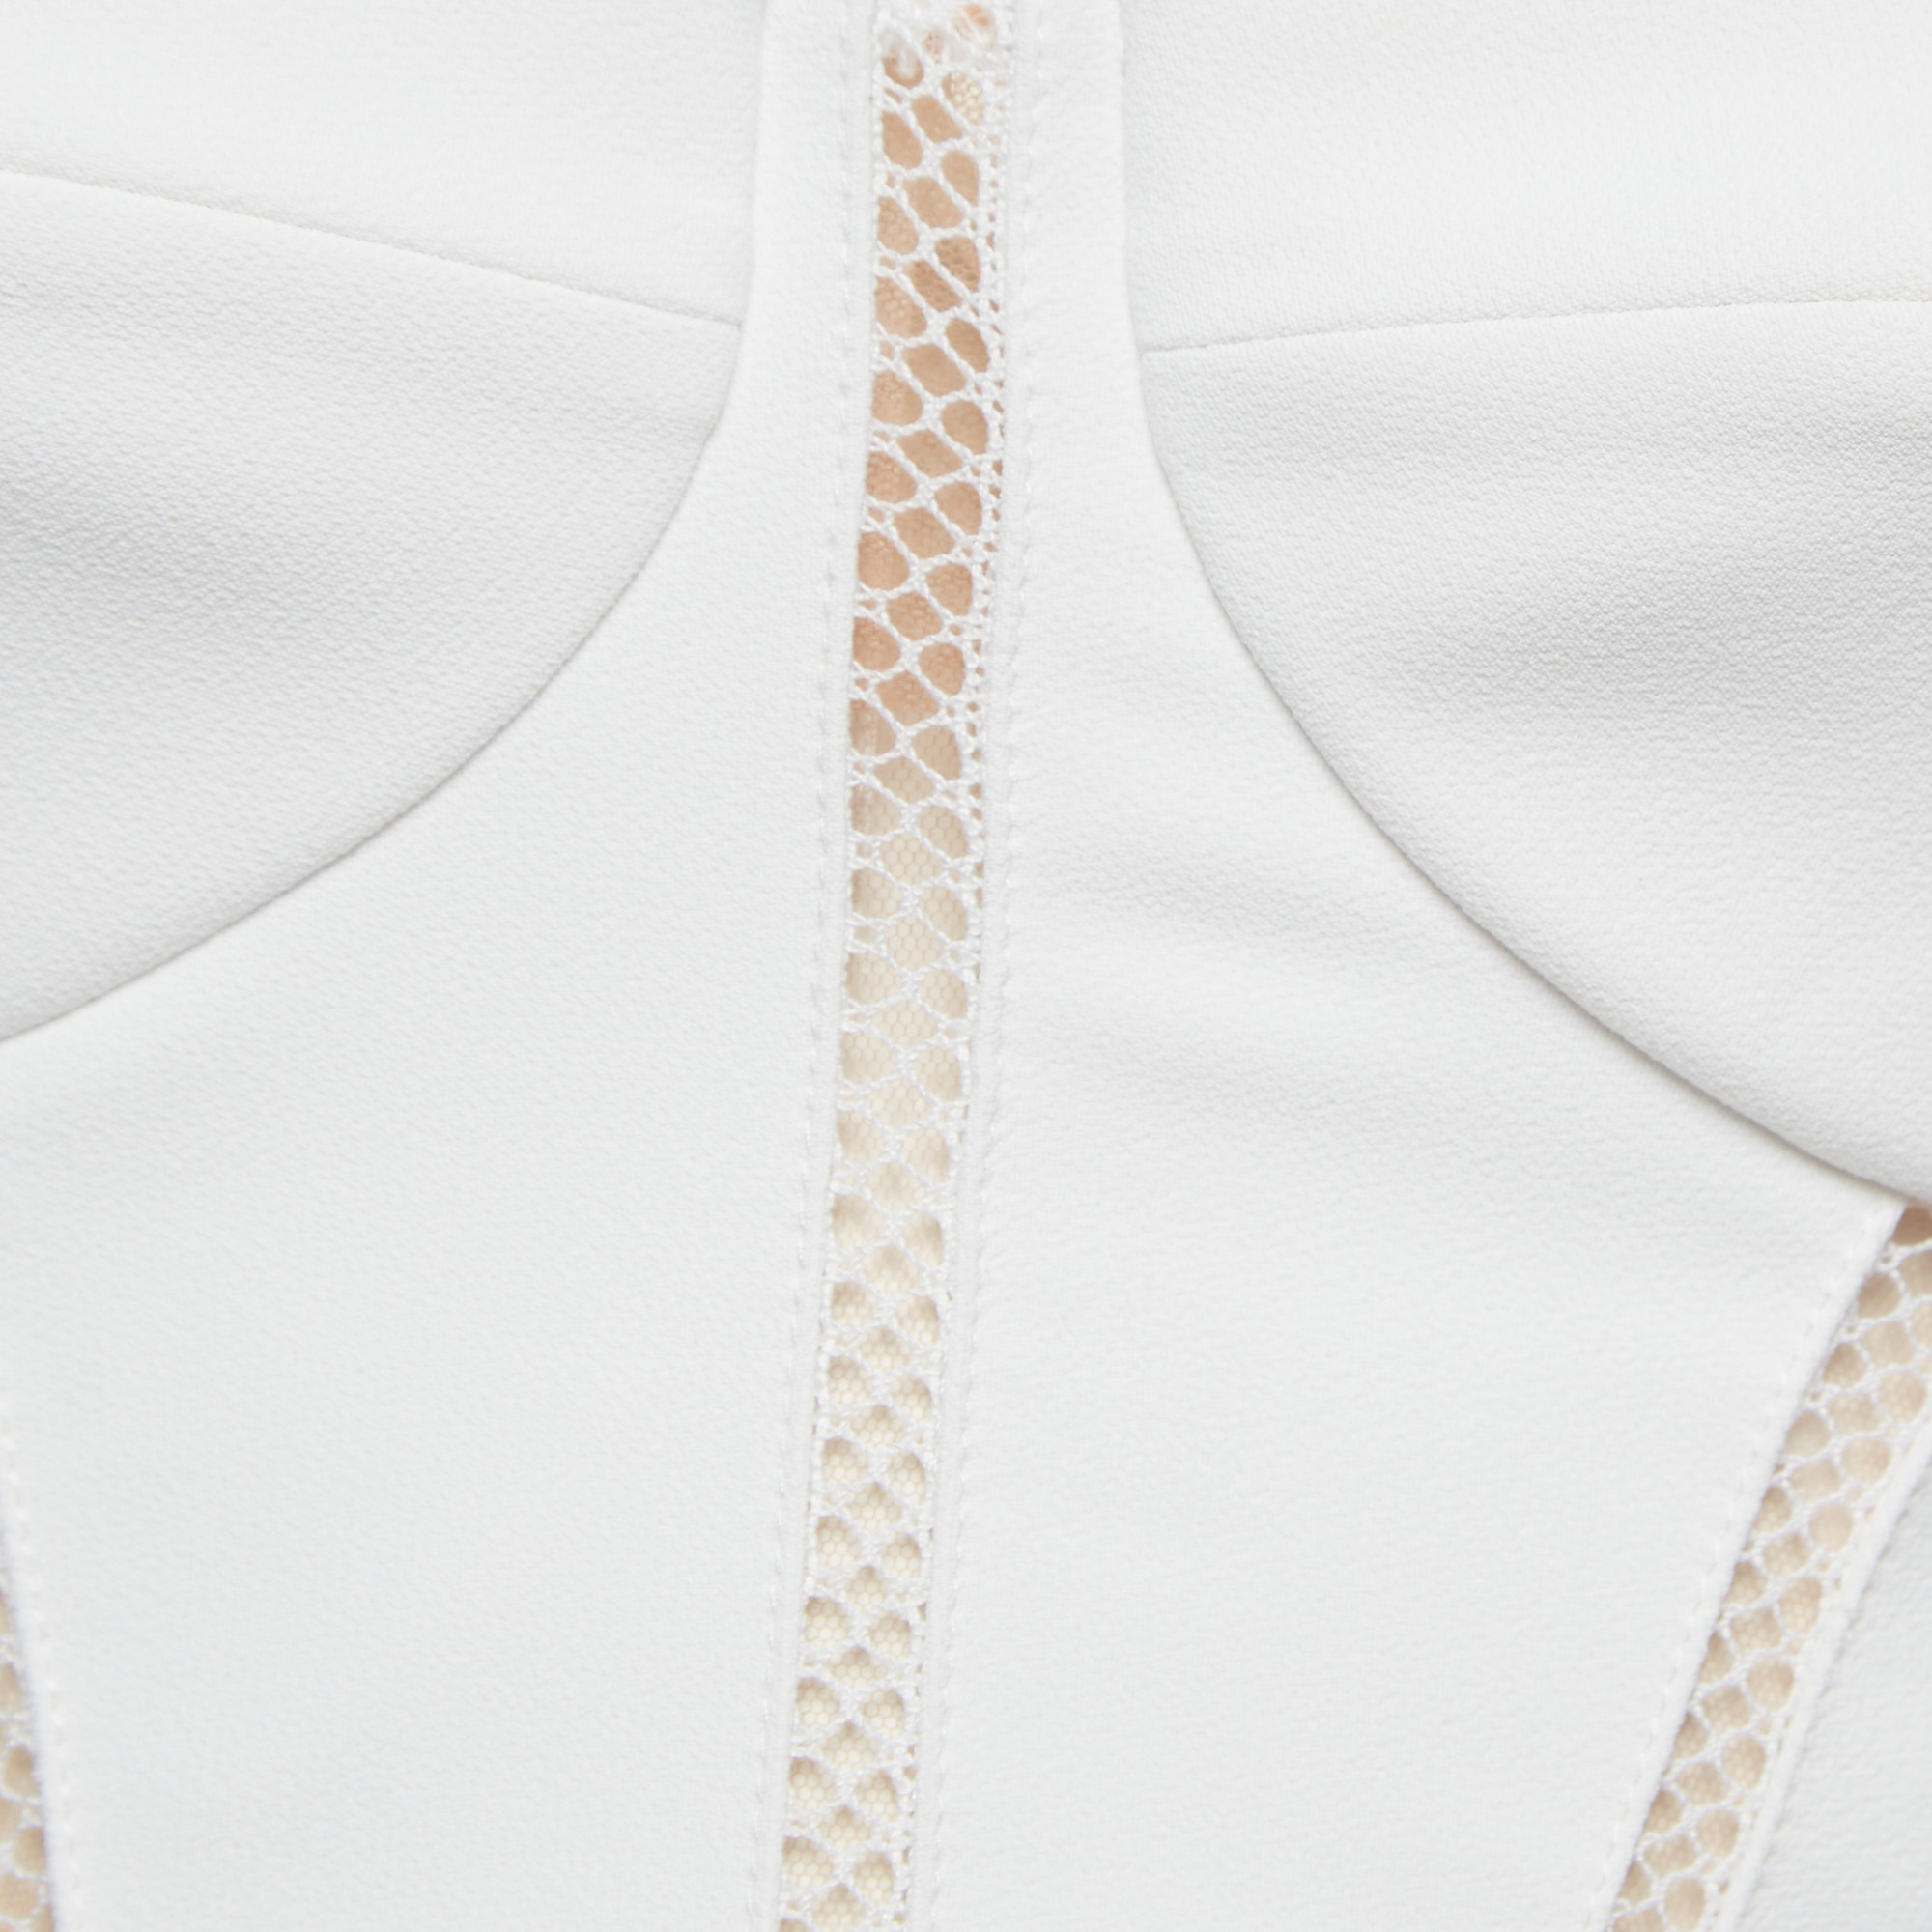 Elisabetta Franchi White Crepe Strapless Padded Crop Top S